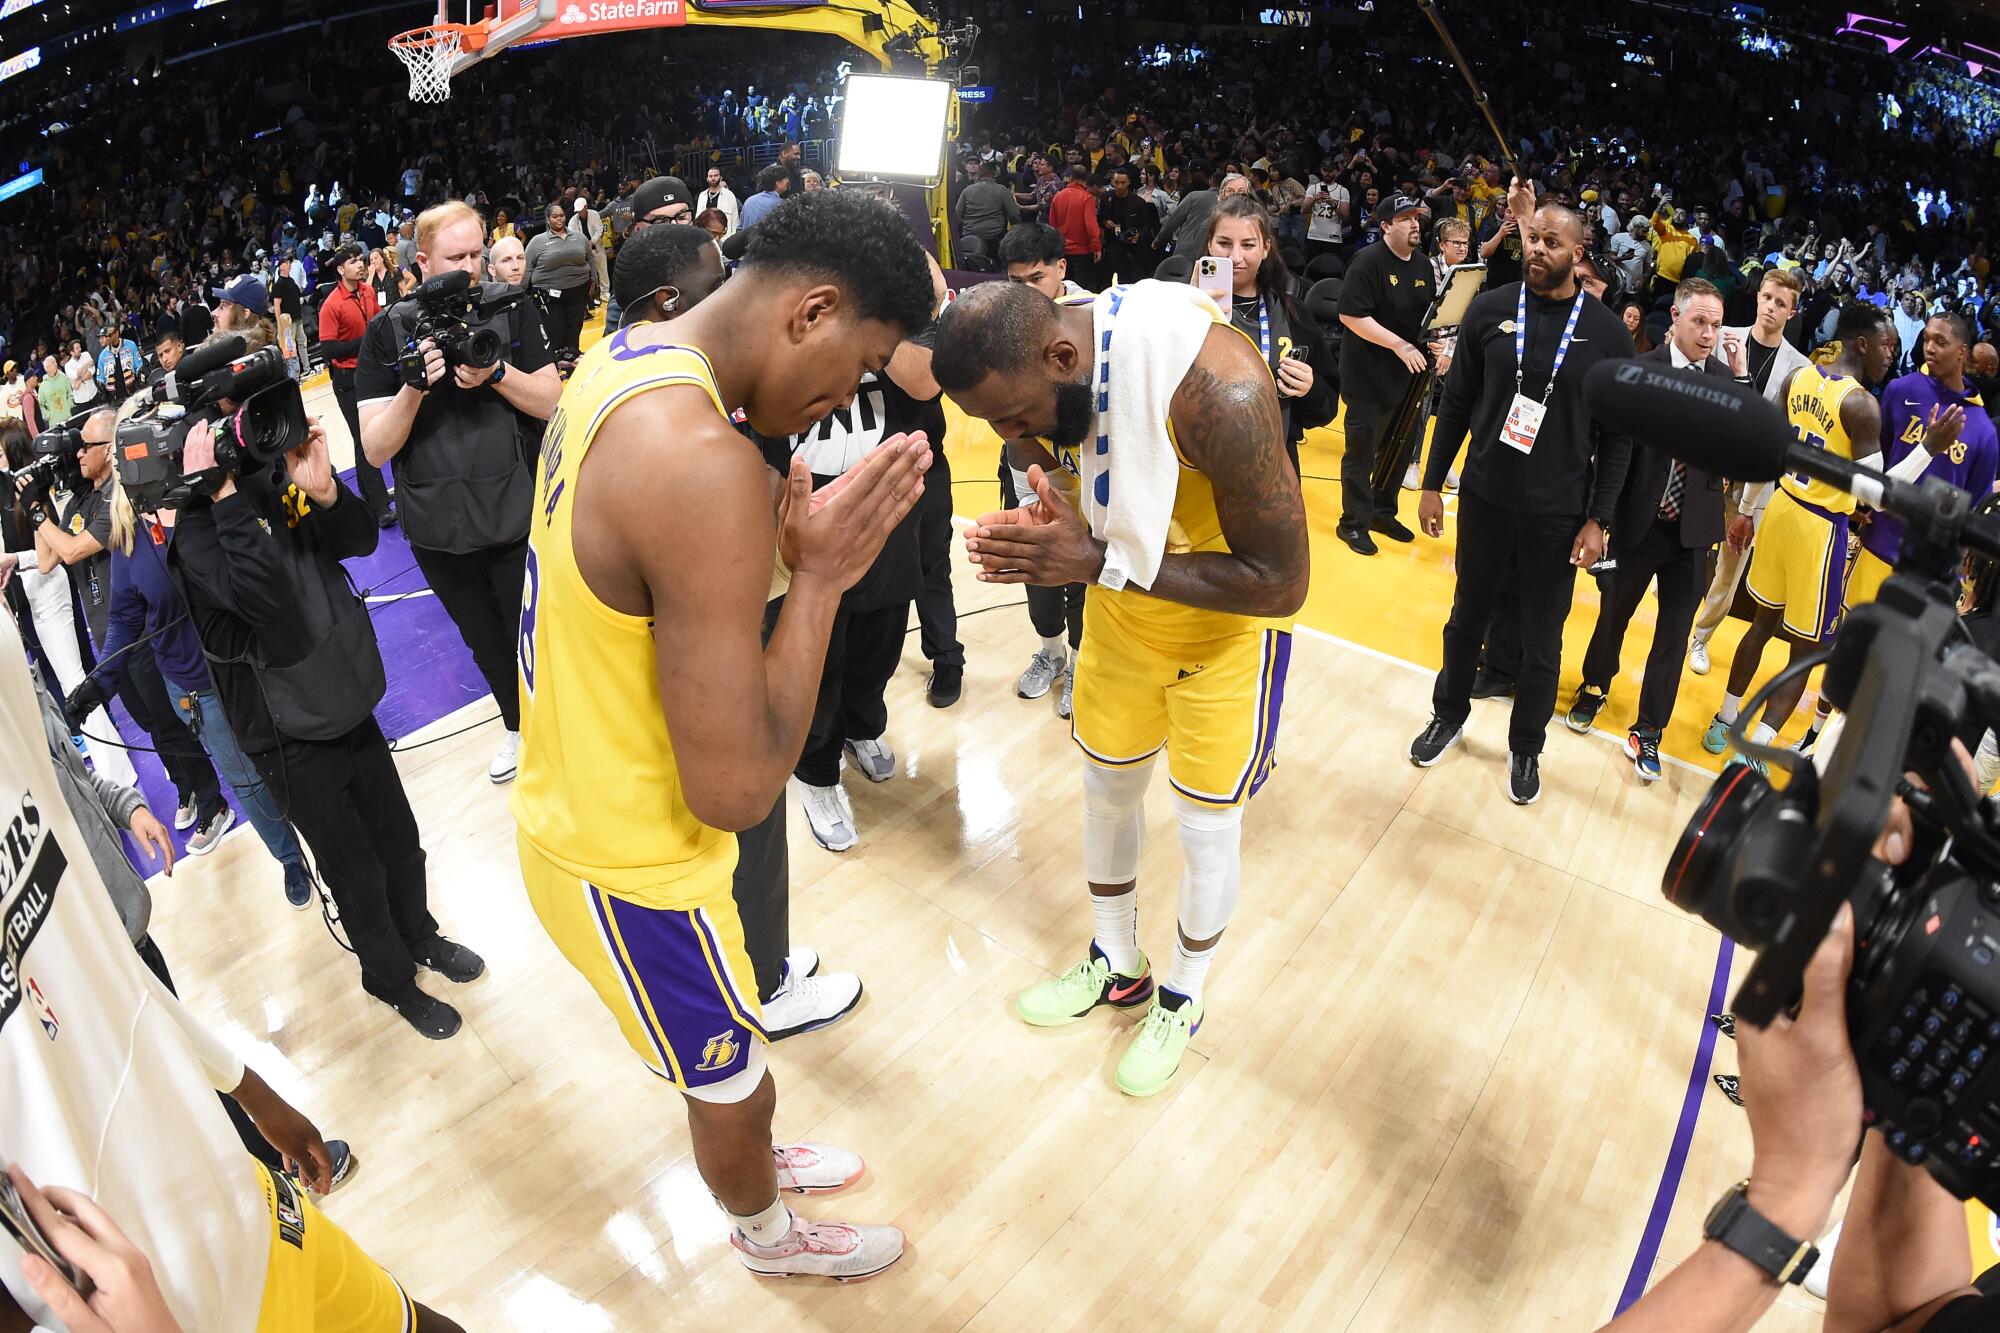 Lakers teammates Rui Hachimura, left, and LeBron James pay their respects to each other after a playoff game last season.